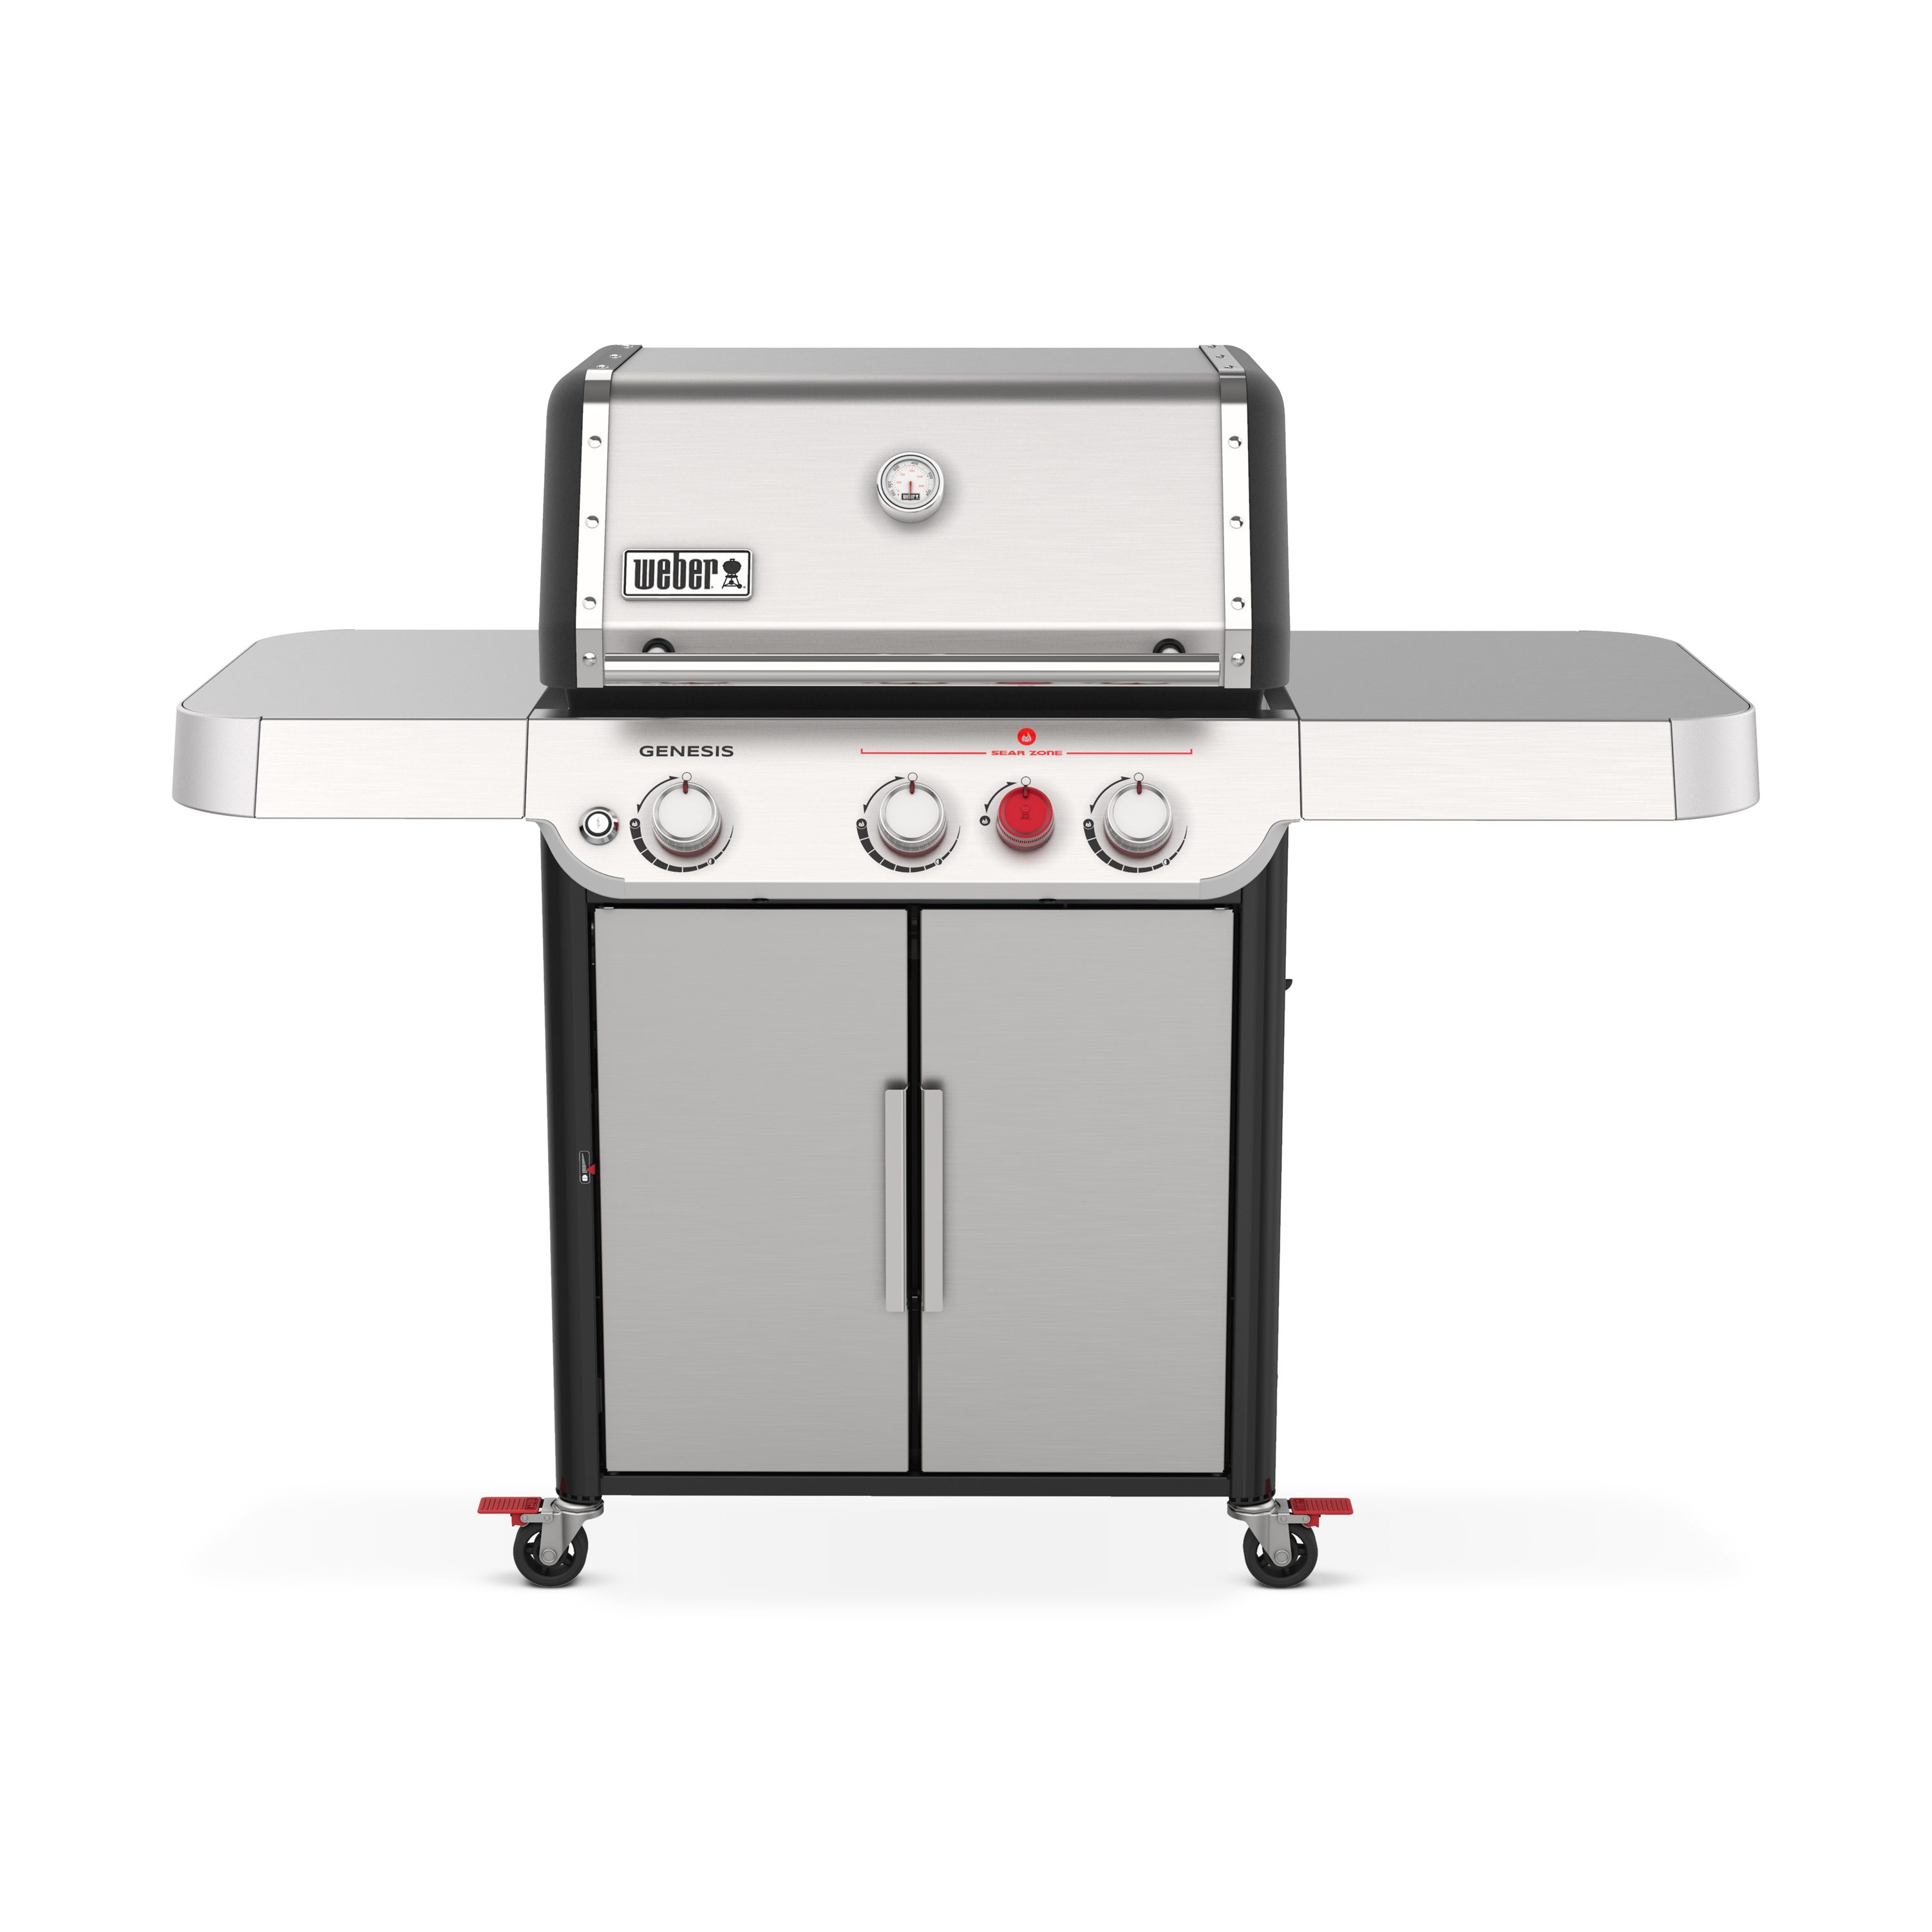 Weber Genesis S-325s Stainless Steel 3-Burner Liquid Propane Gas Grill in the Gas Grills at Lowes.com